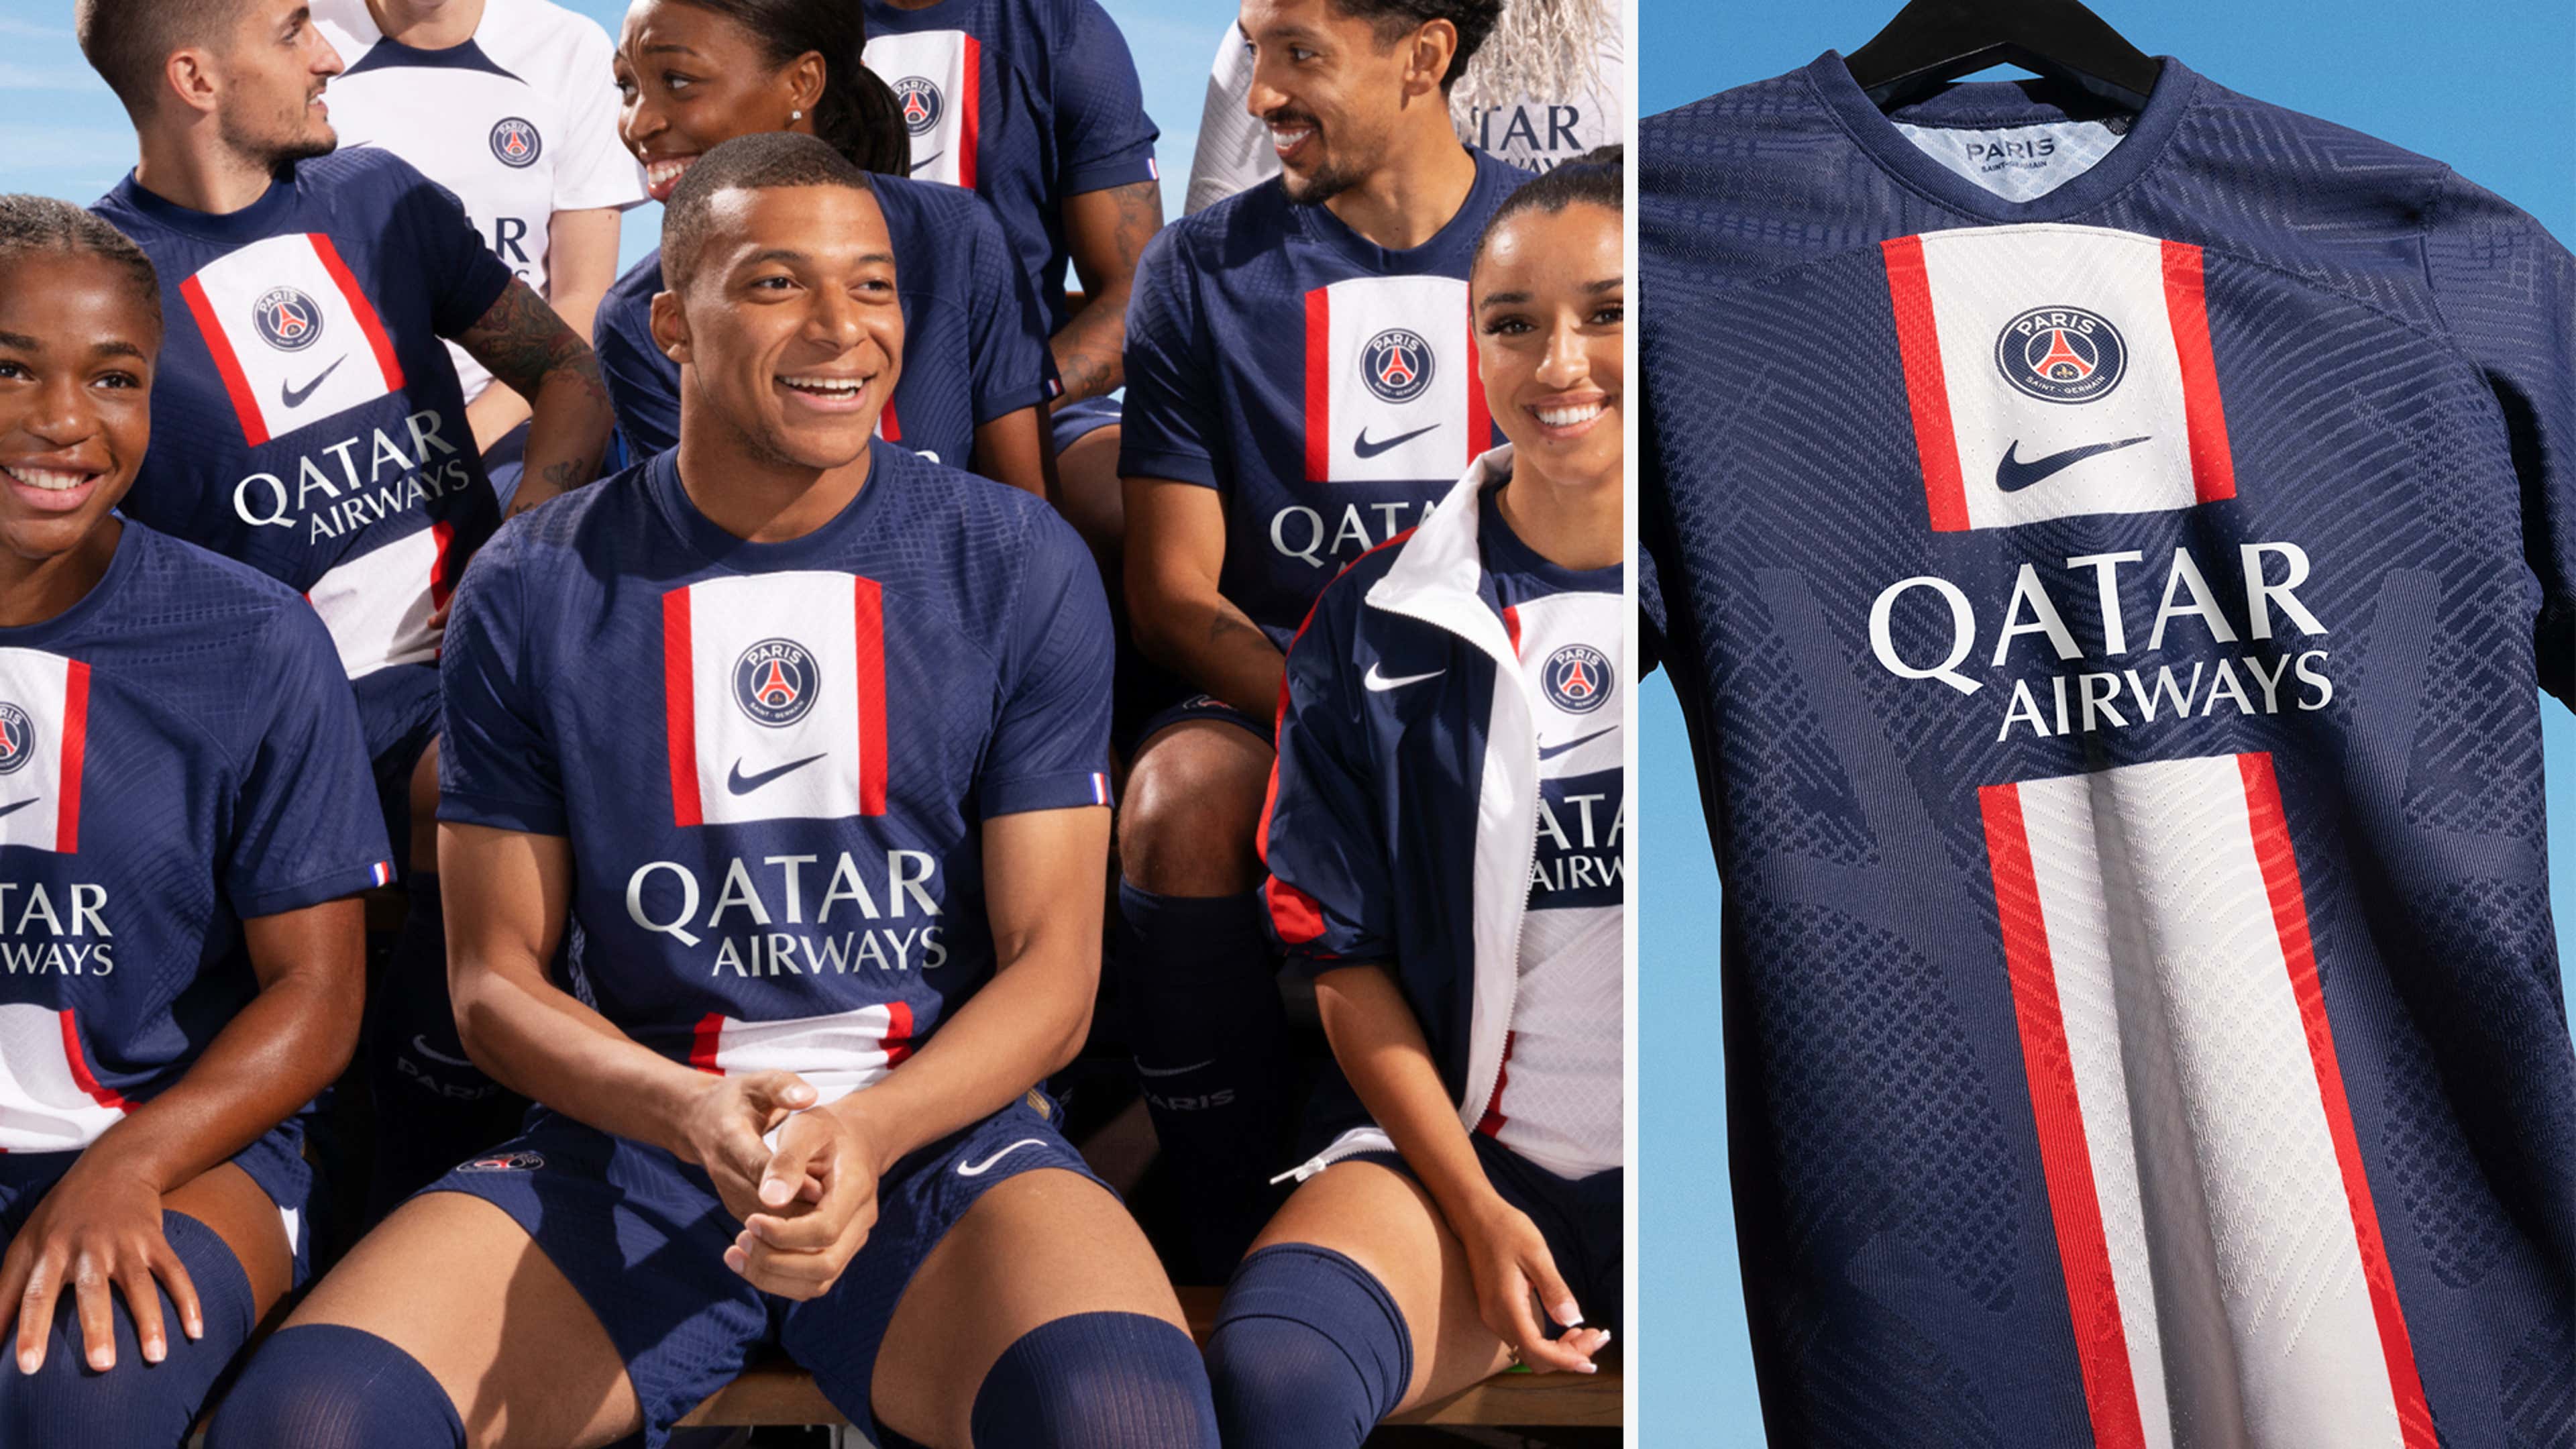 Messi Psg T-Shirts for Sale